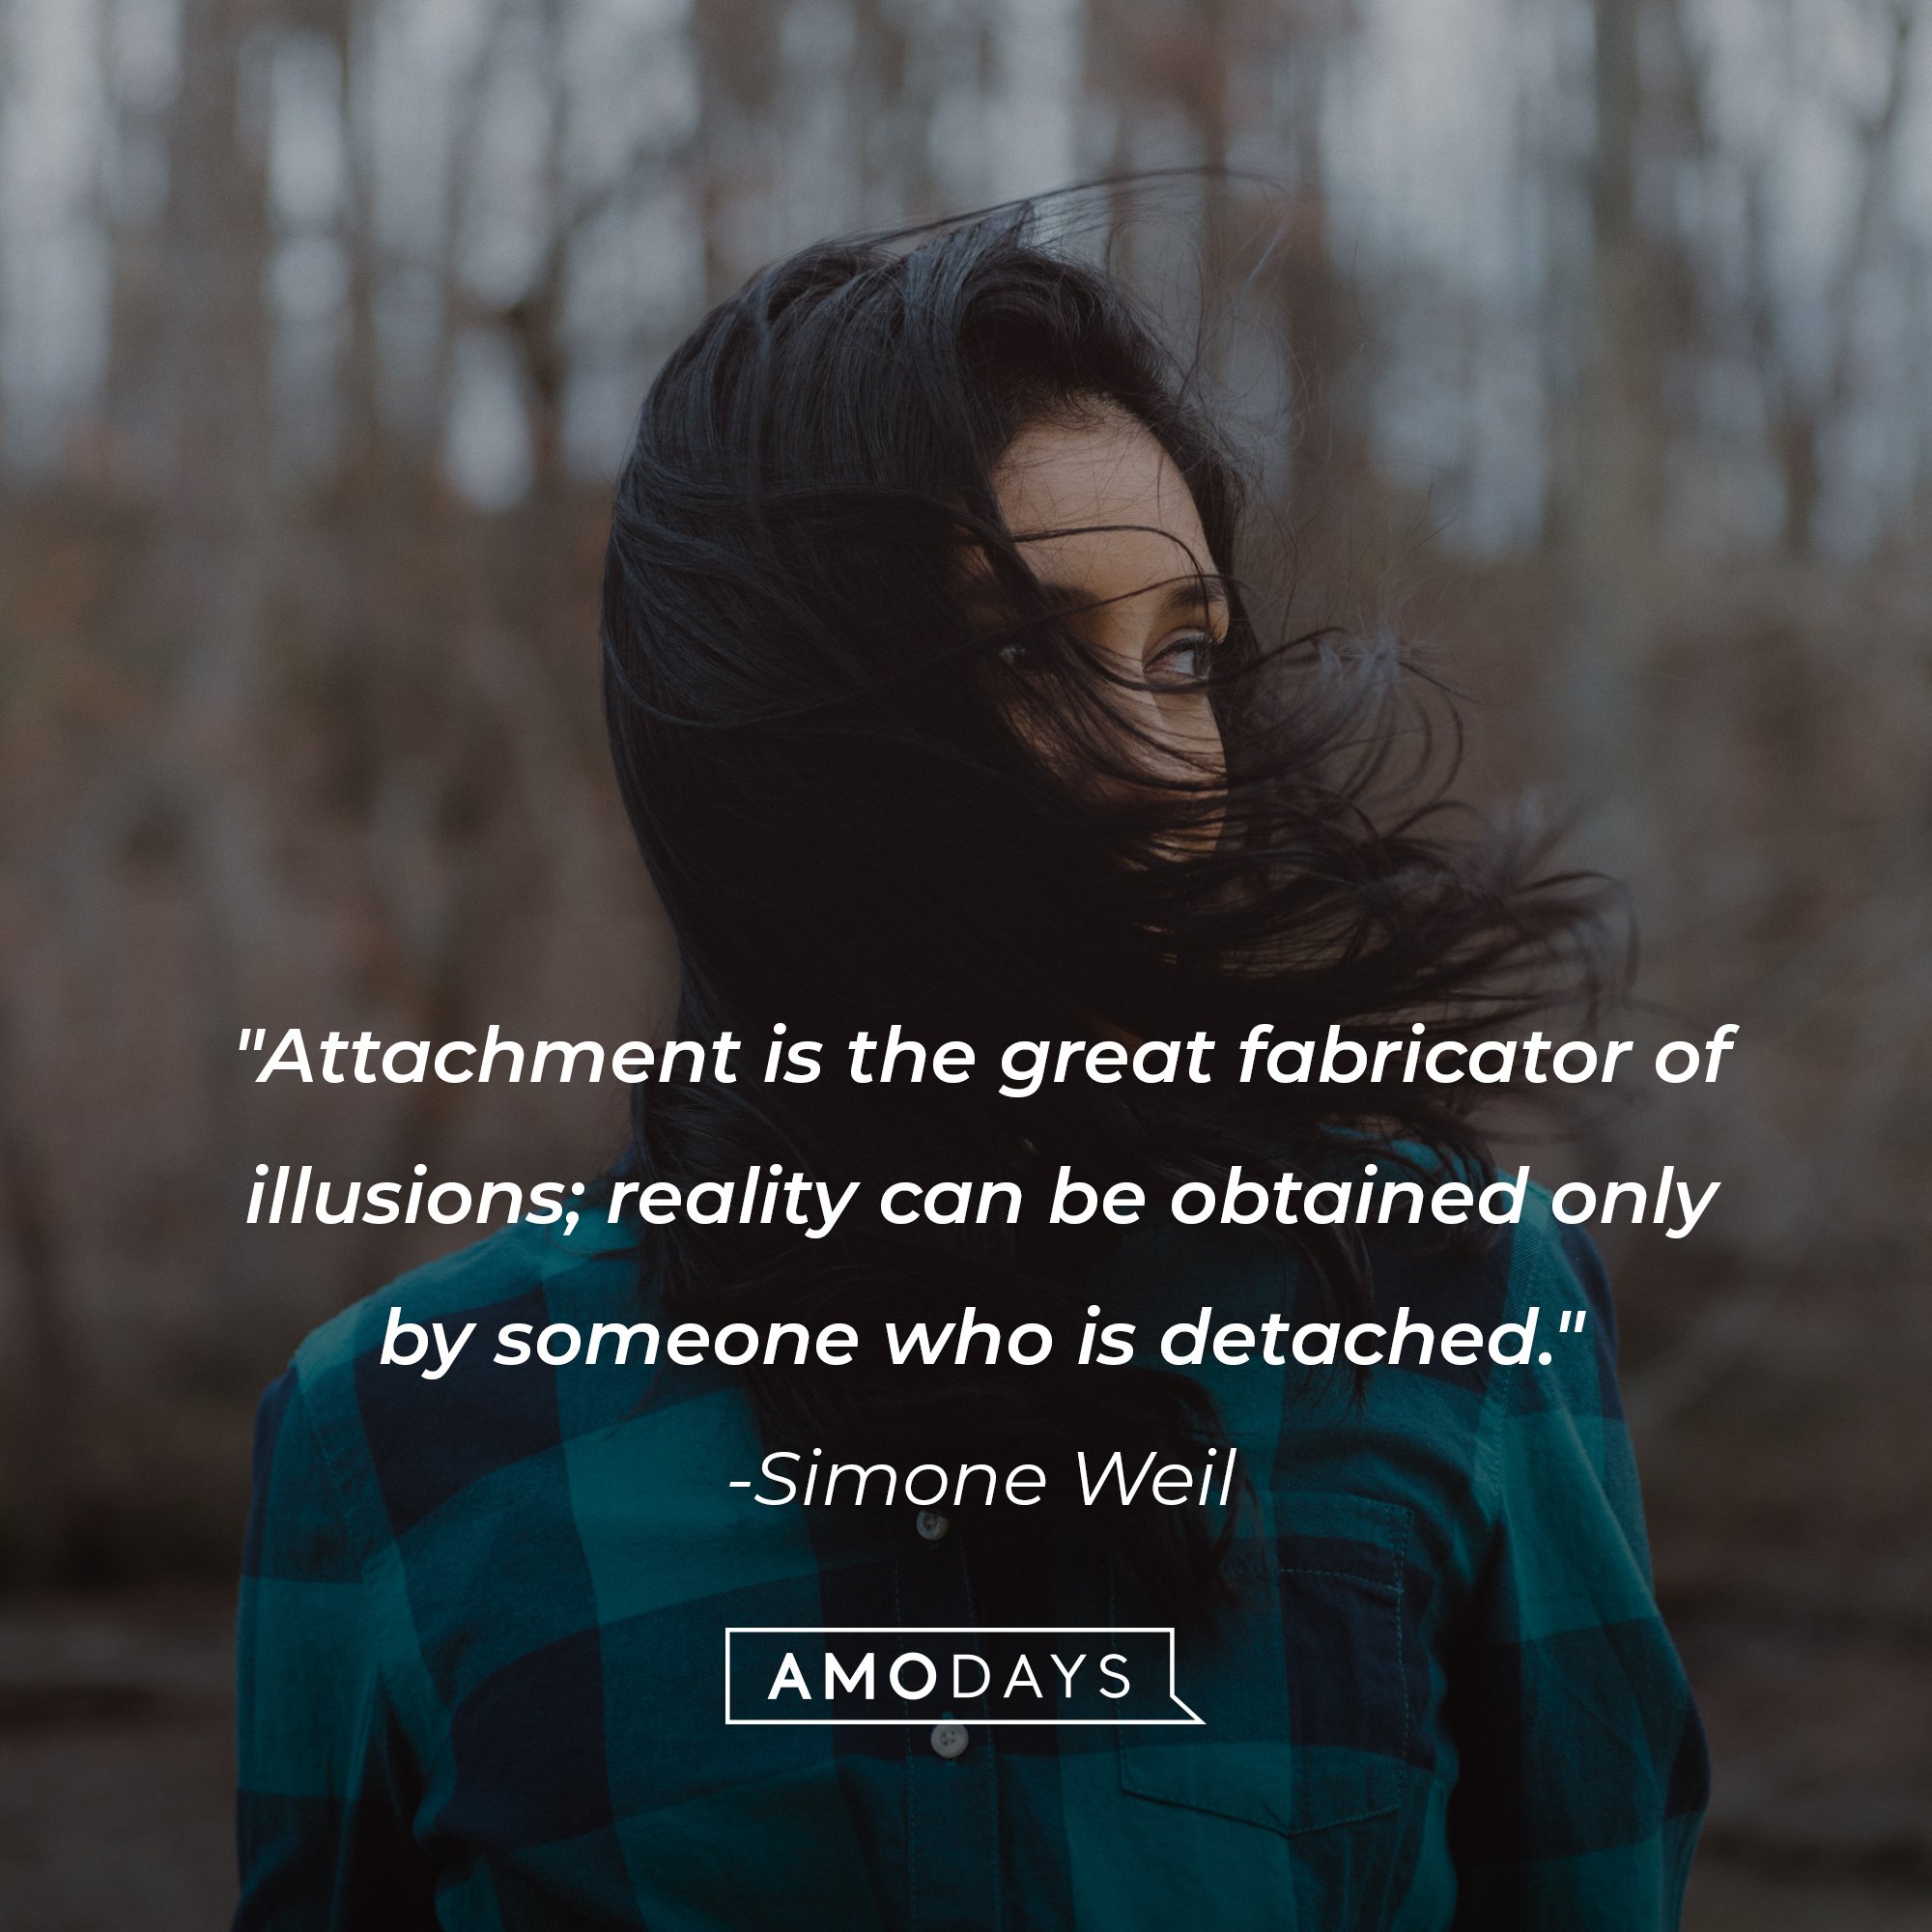 Simone Weil's quote: "Attachment is the great fabricator of illusions; reality can be obtained only by someone who is detached." | Image: AmoDays